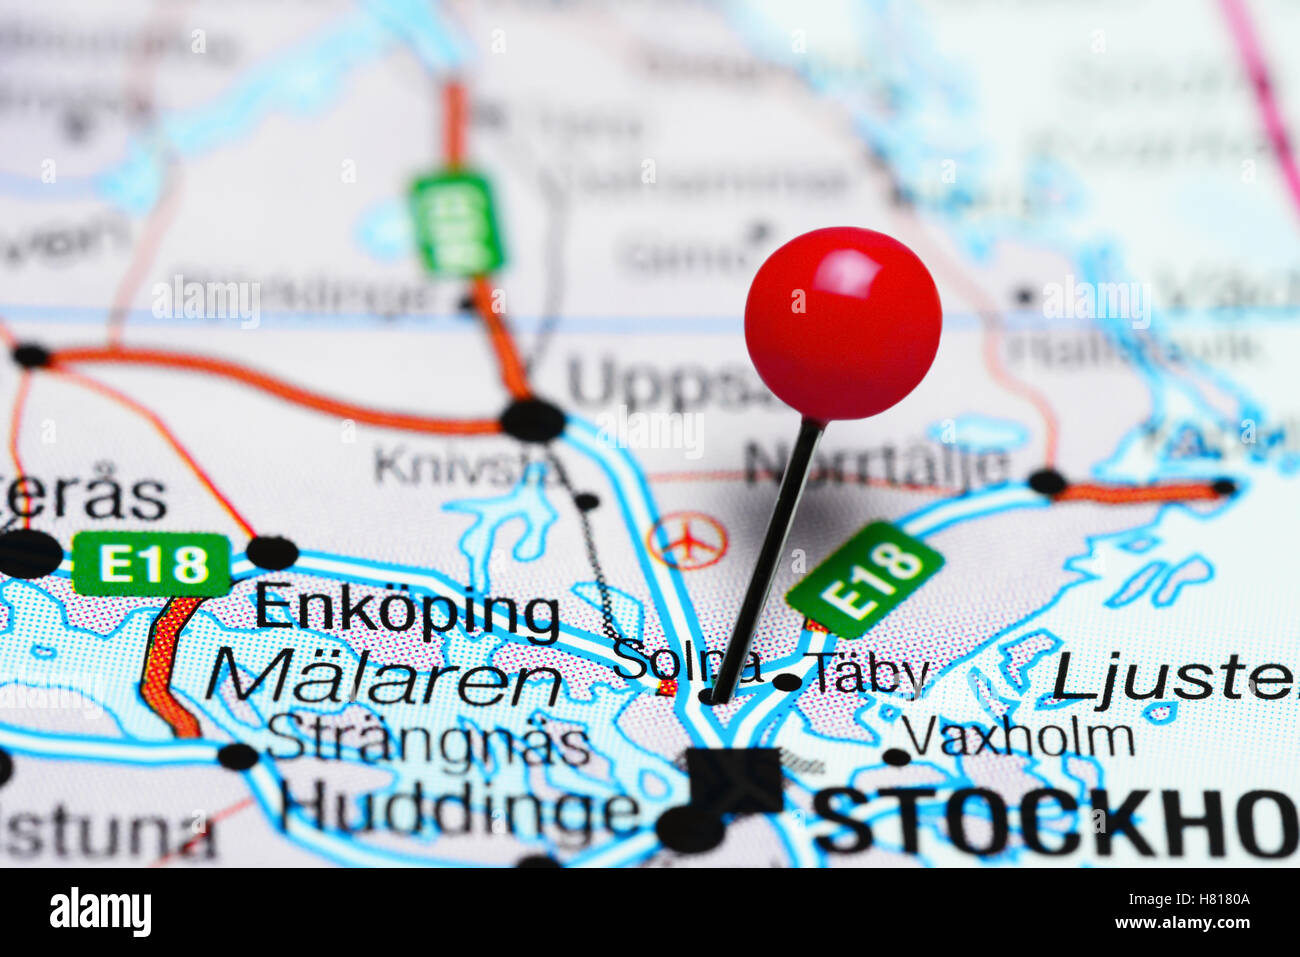 Solna pinned on a map of Sweden Stock Photo